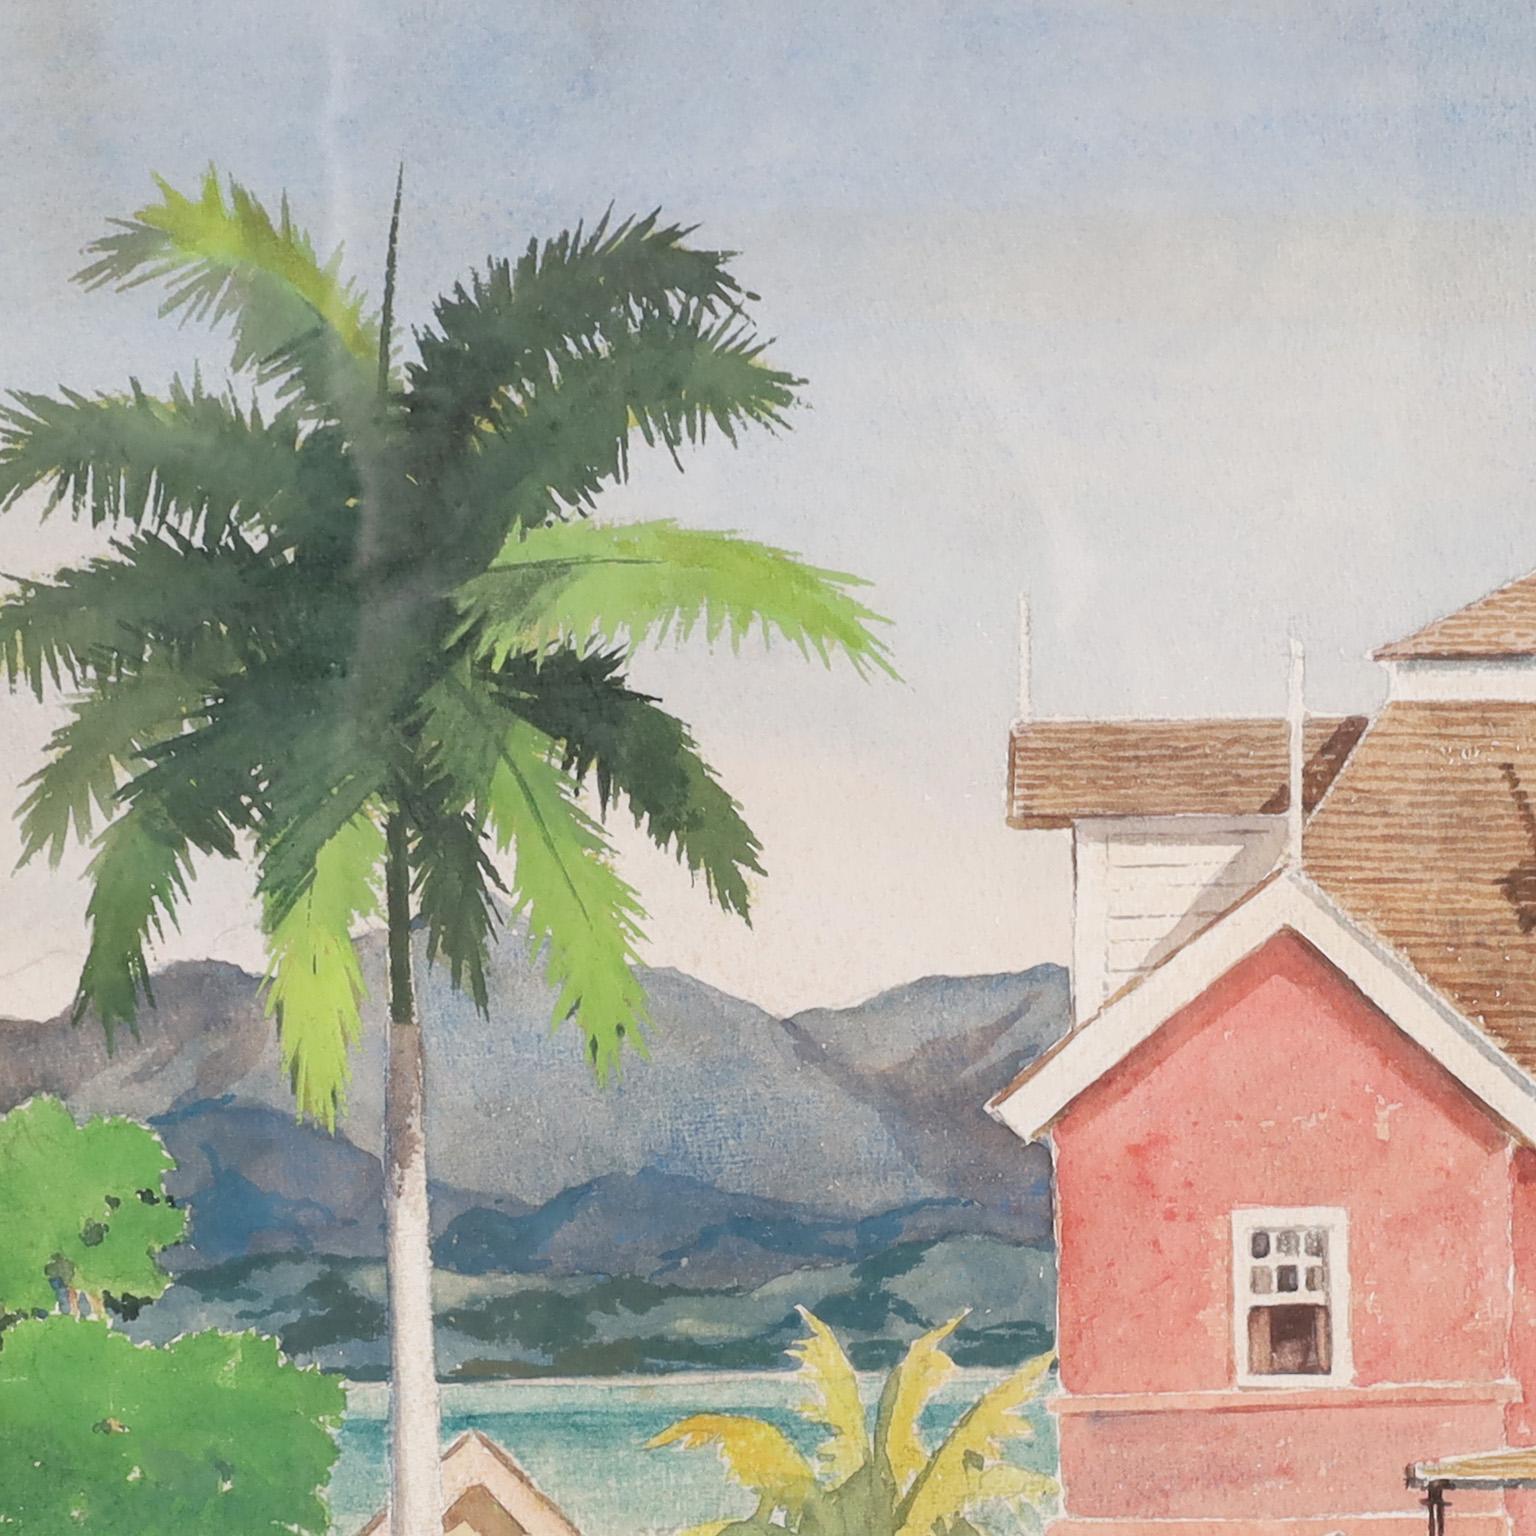 Delightful watercolor on paper of colonial architecture with water, mountains, and two mysterious figures. Signed in the lower left by noted American artist William Henry. Presented in a gilt wood frame under glass. 